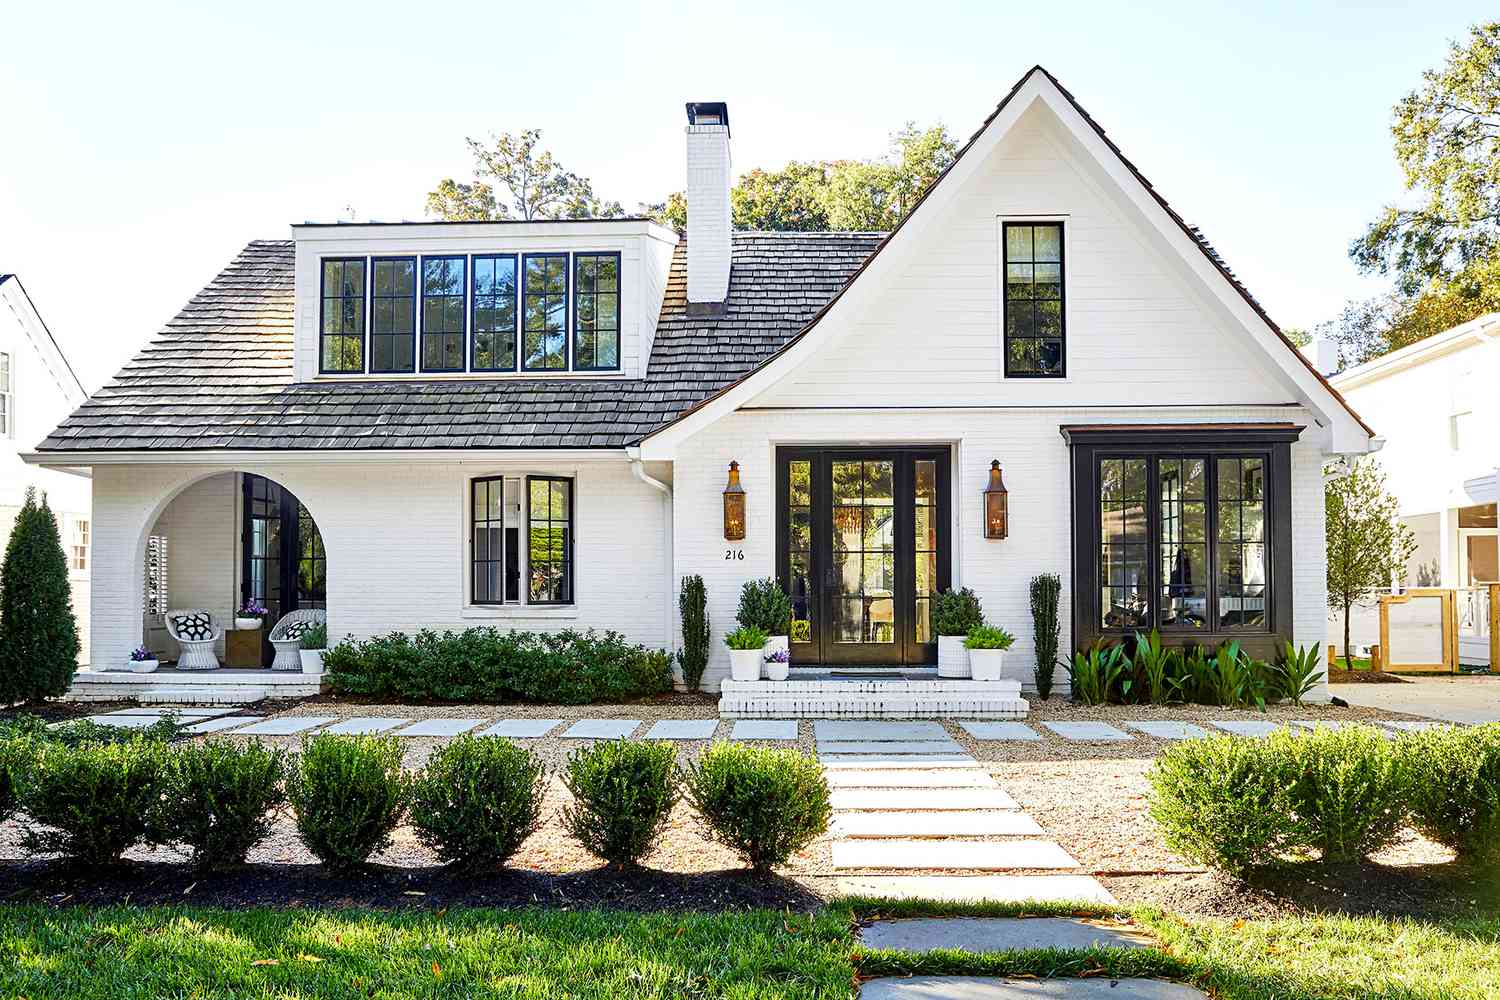 Tudor-Style Home Ideas that Bring Old-World Style into the Modern Age    Better Homes & Gardens